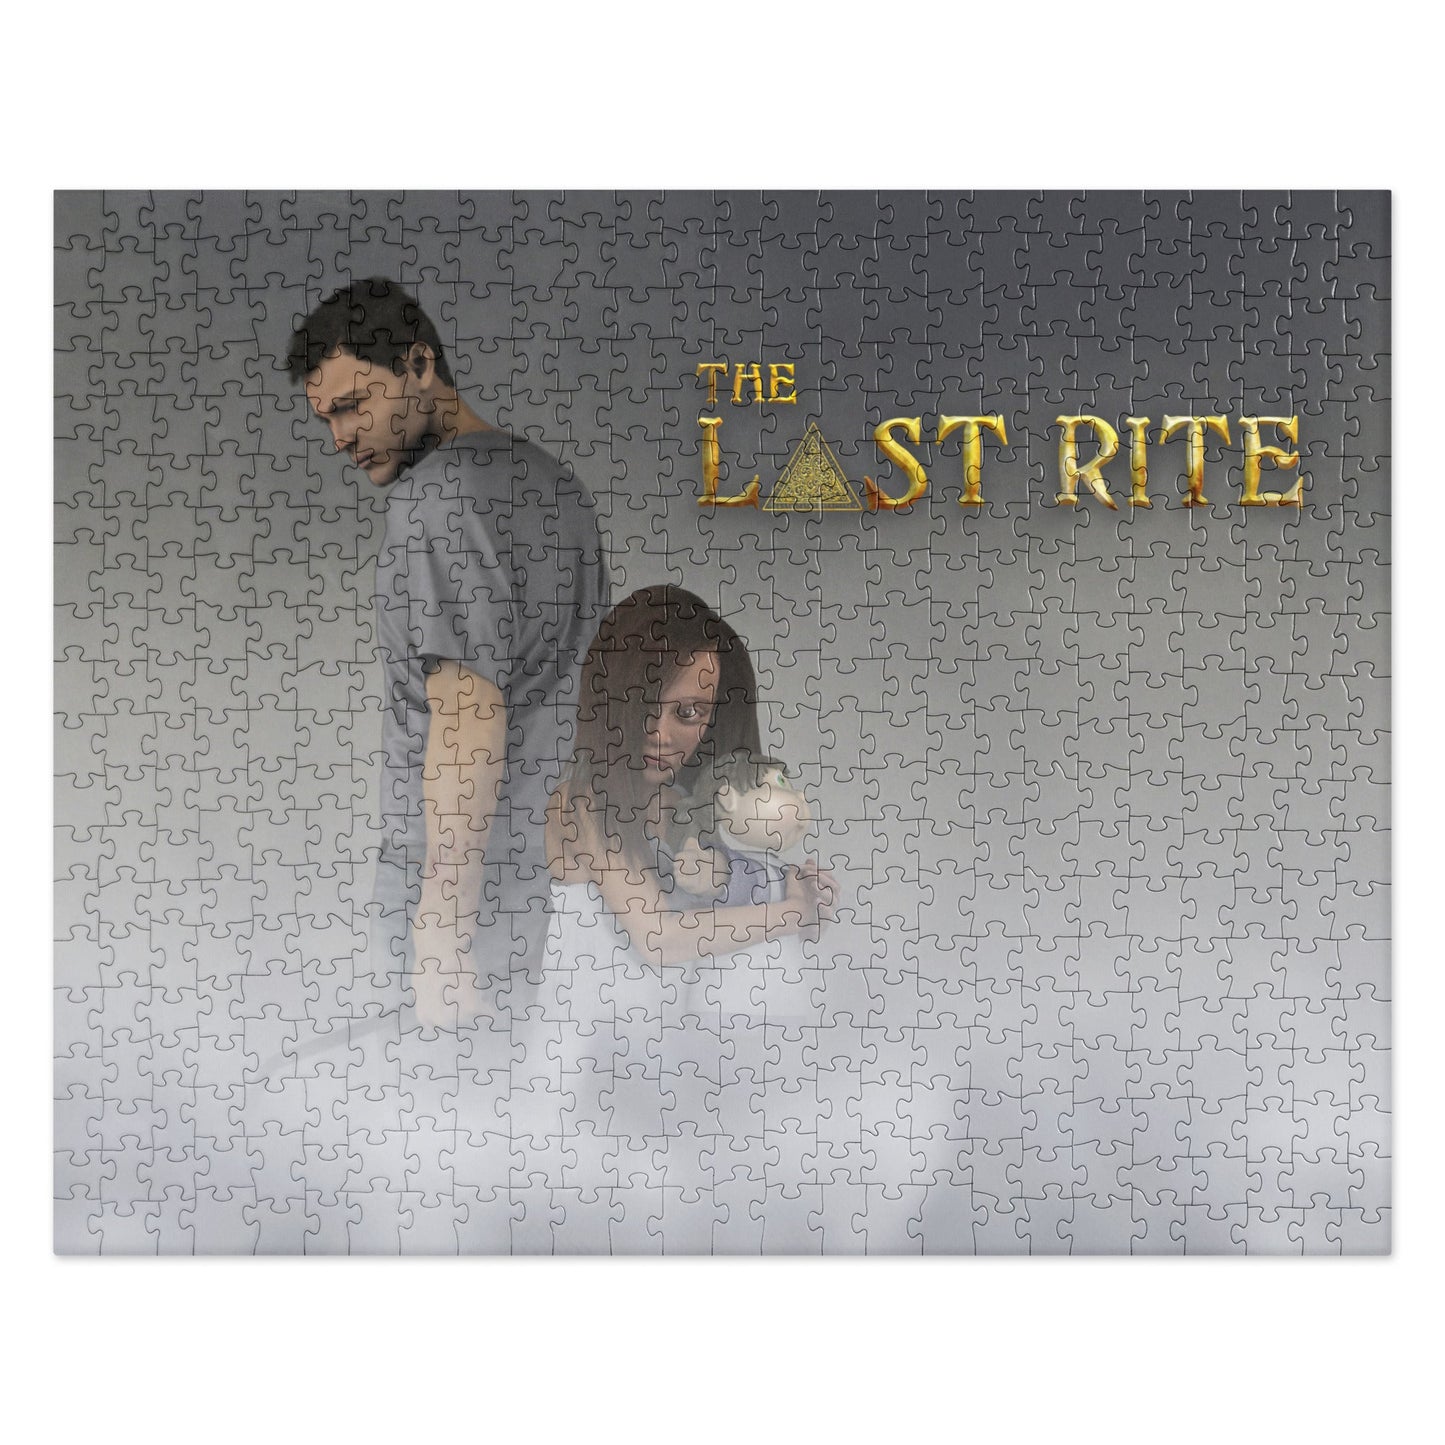 Jigsaw puzzle - The Last Rite - Daniel and Bethany in the Fog - Spectral Ink Shop - -4850427_13432